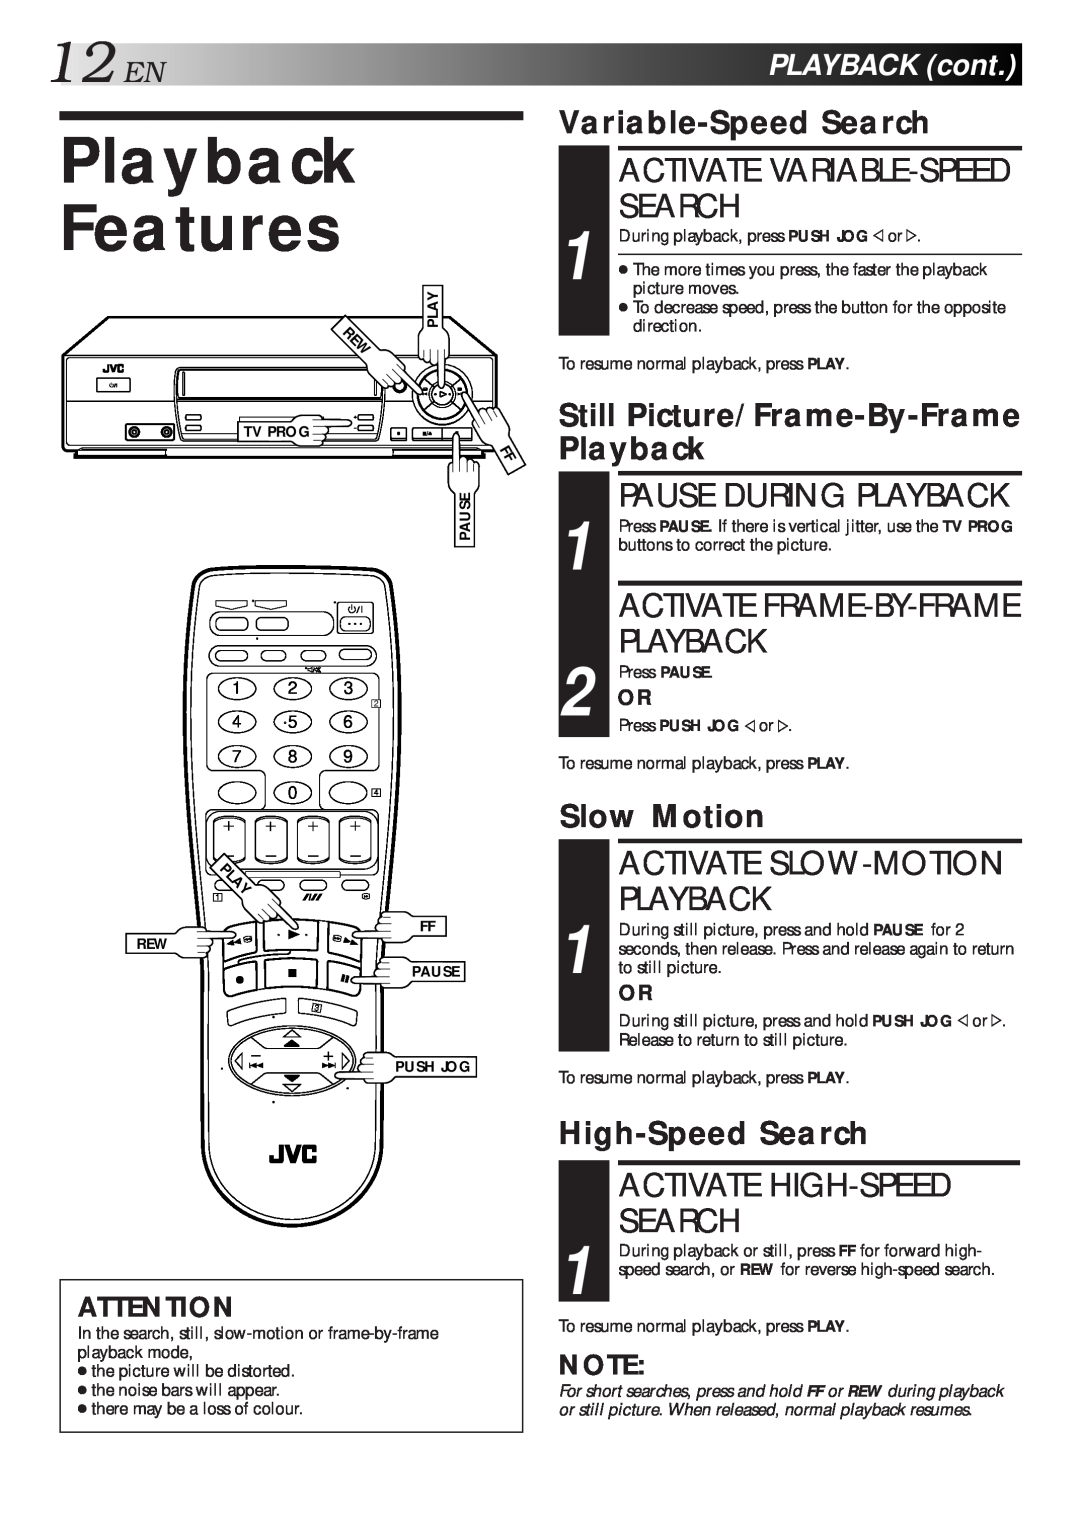 JVC HR-J461MS Playback Features, 12EN, Activate High-Speed Search, PLAYBACKcont, Variable-Speed Search, Slow Motion 